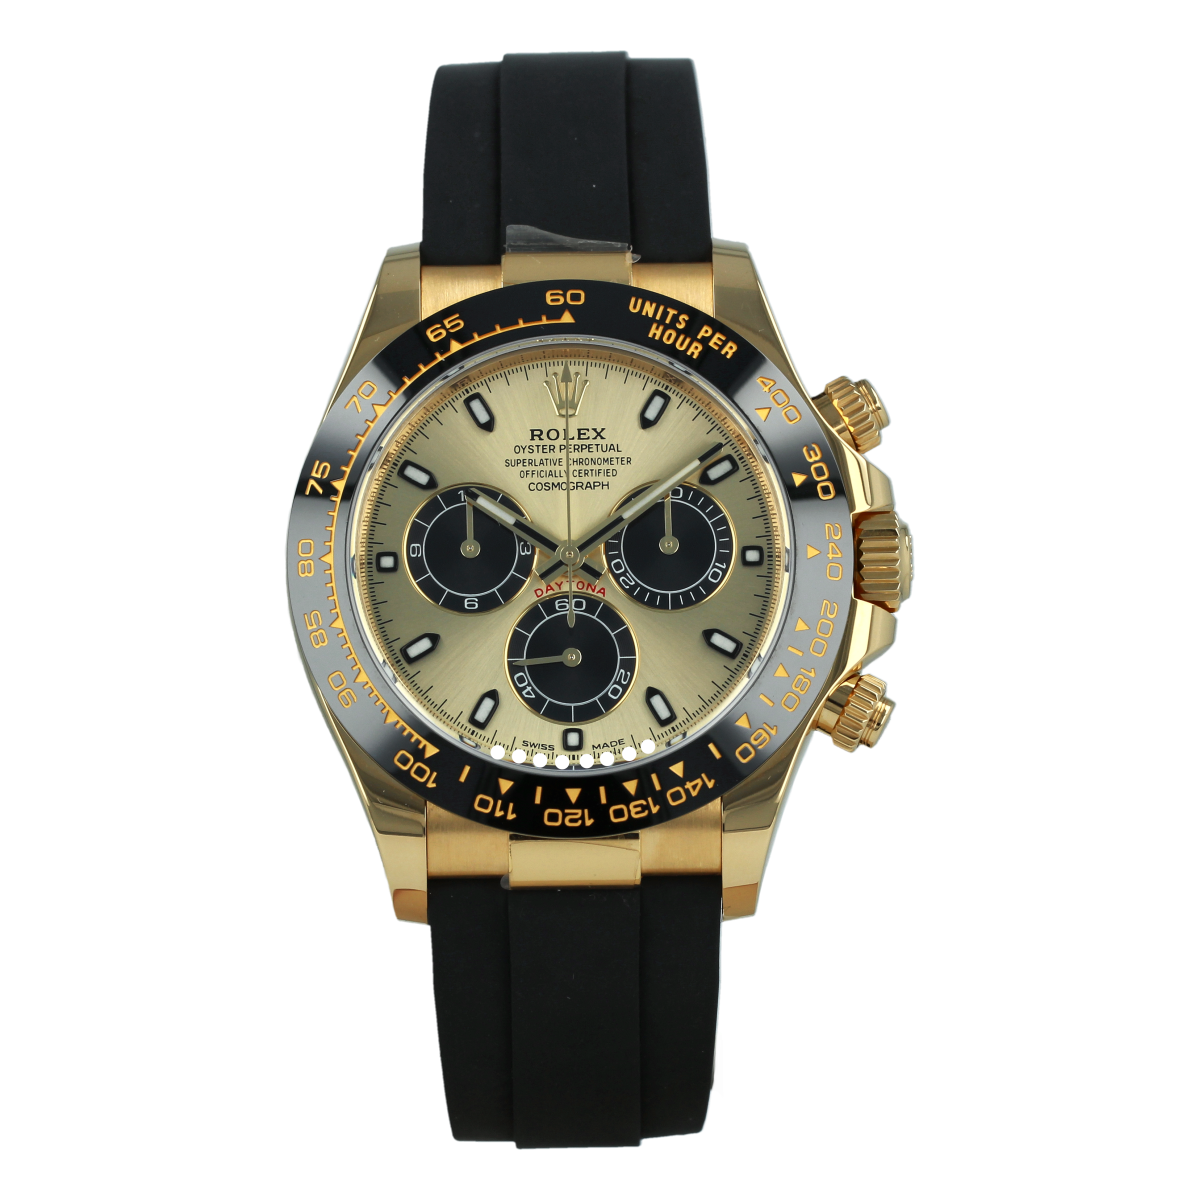 Rolex Cosmograph Daytona 116518LN Yellow Gold Champagne Dial | Buy pre-owned Rolex watch